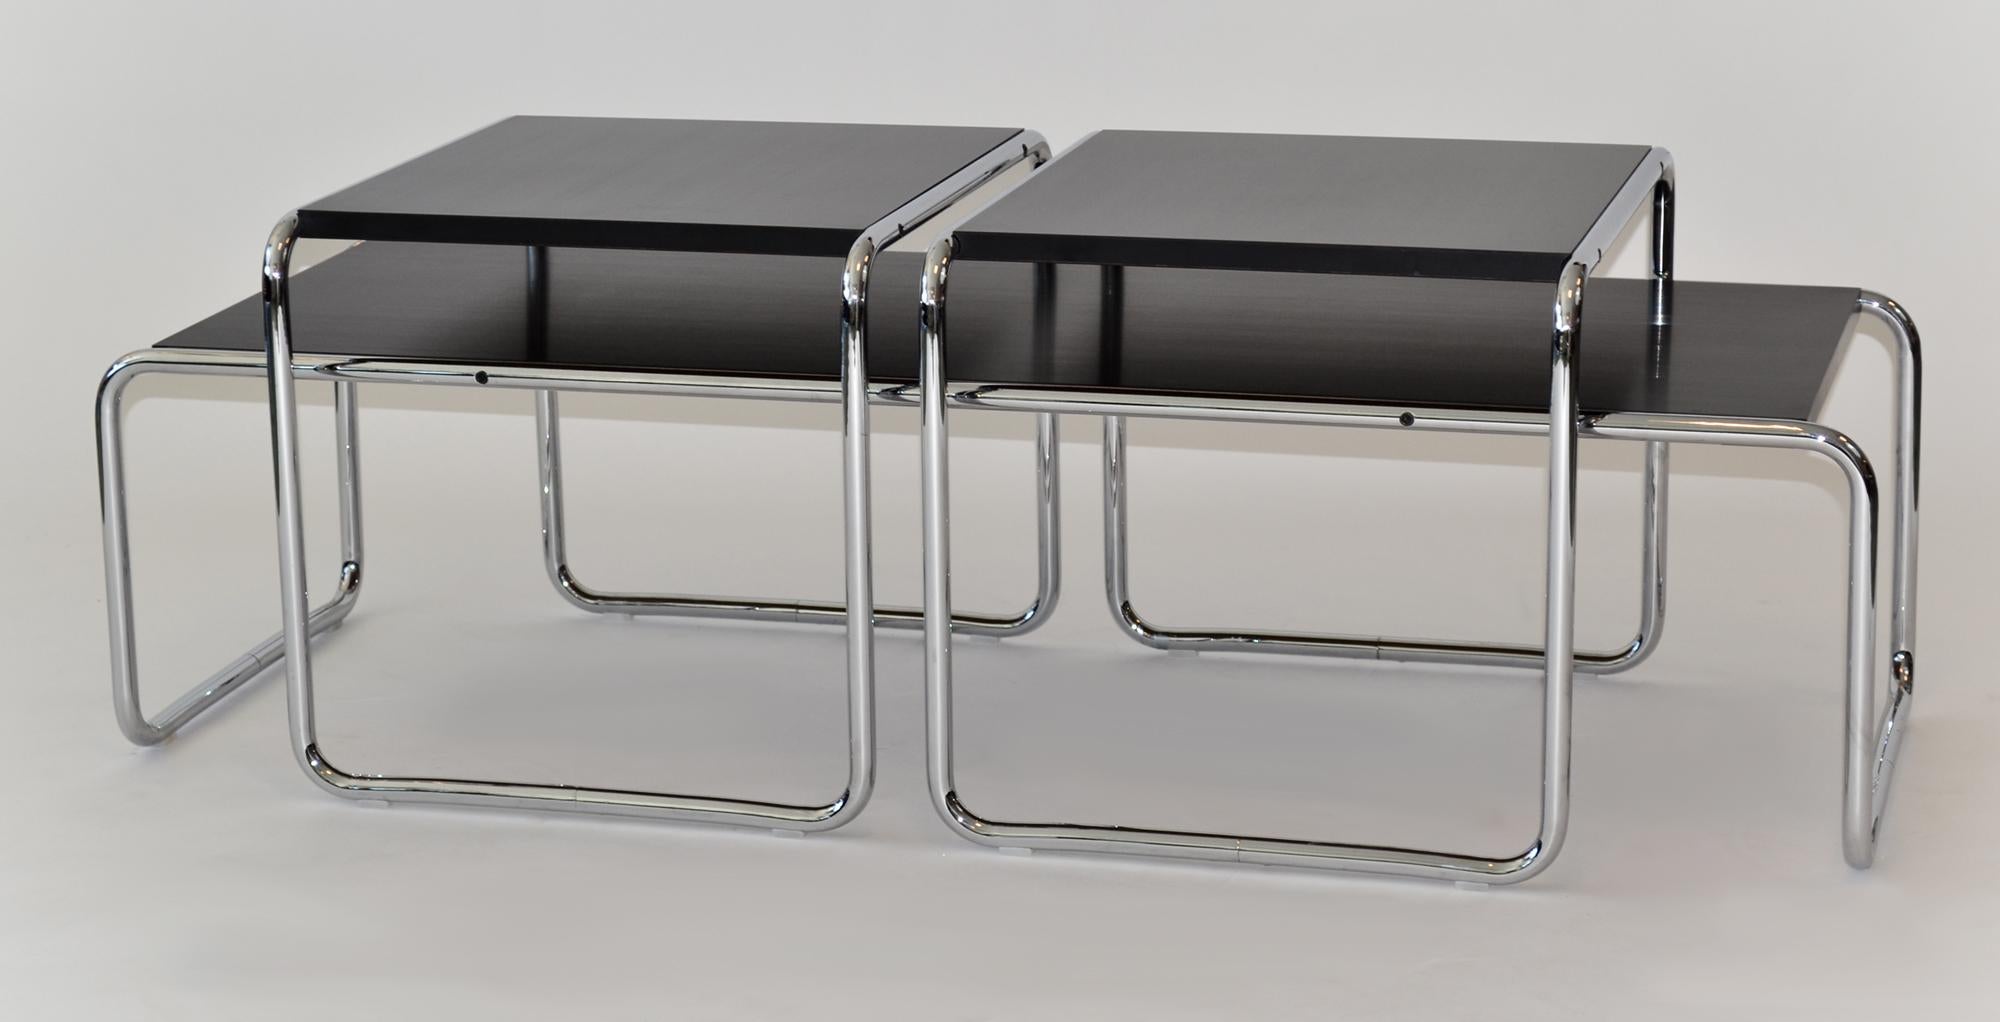 Set of 3 Marcel Breuer Laccio Coffee and Side Tables Black Chrome Knoll Studio
This exquisite set, comprised of a coffee table and a pair of side tables, showcases Marcel Breuer’s iconic Laccio design. Renowned for his minimalist and Bauhaus